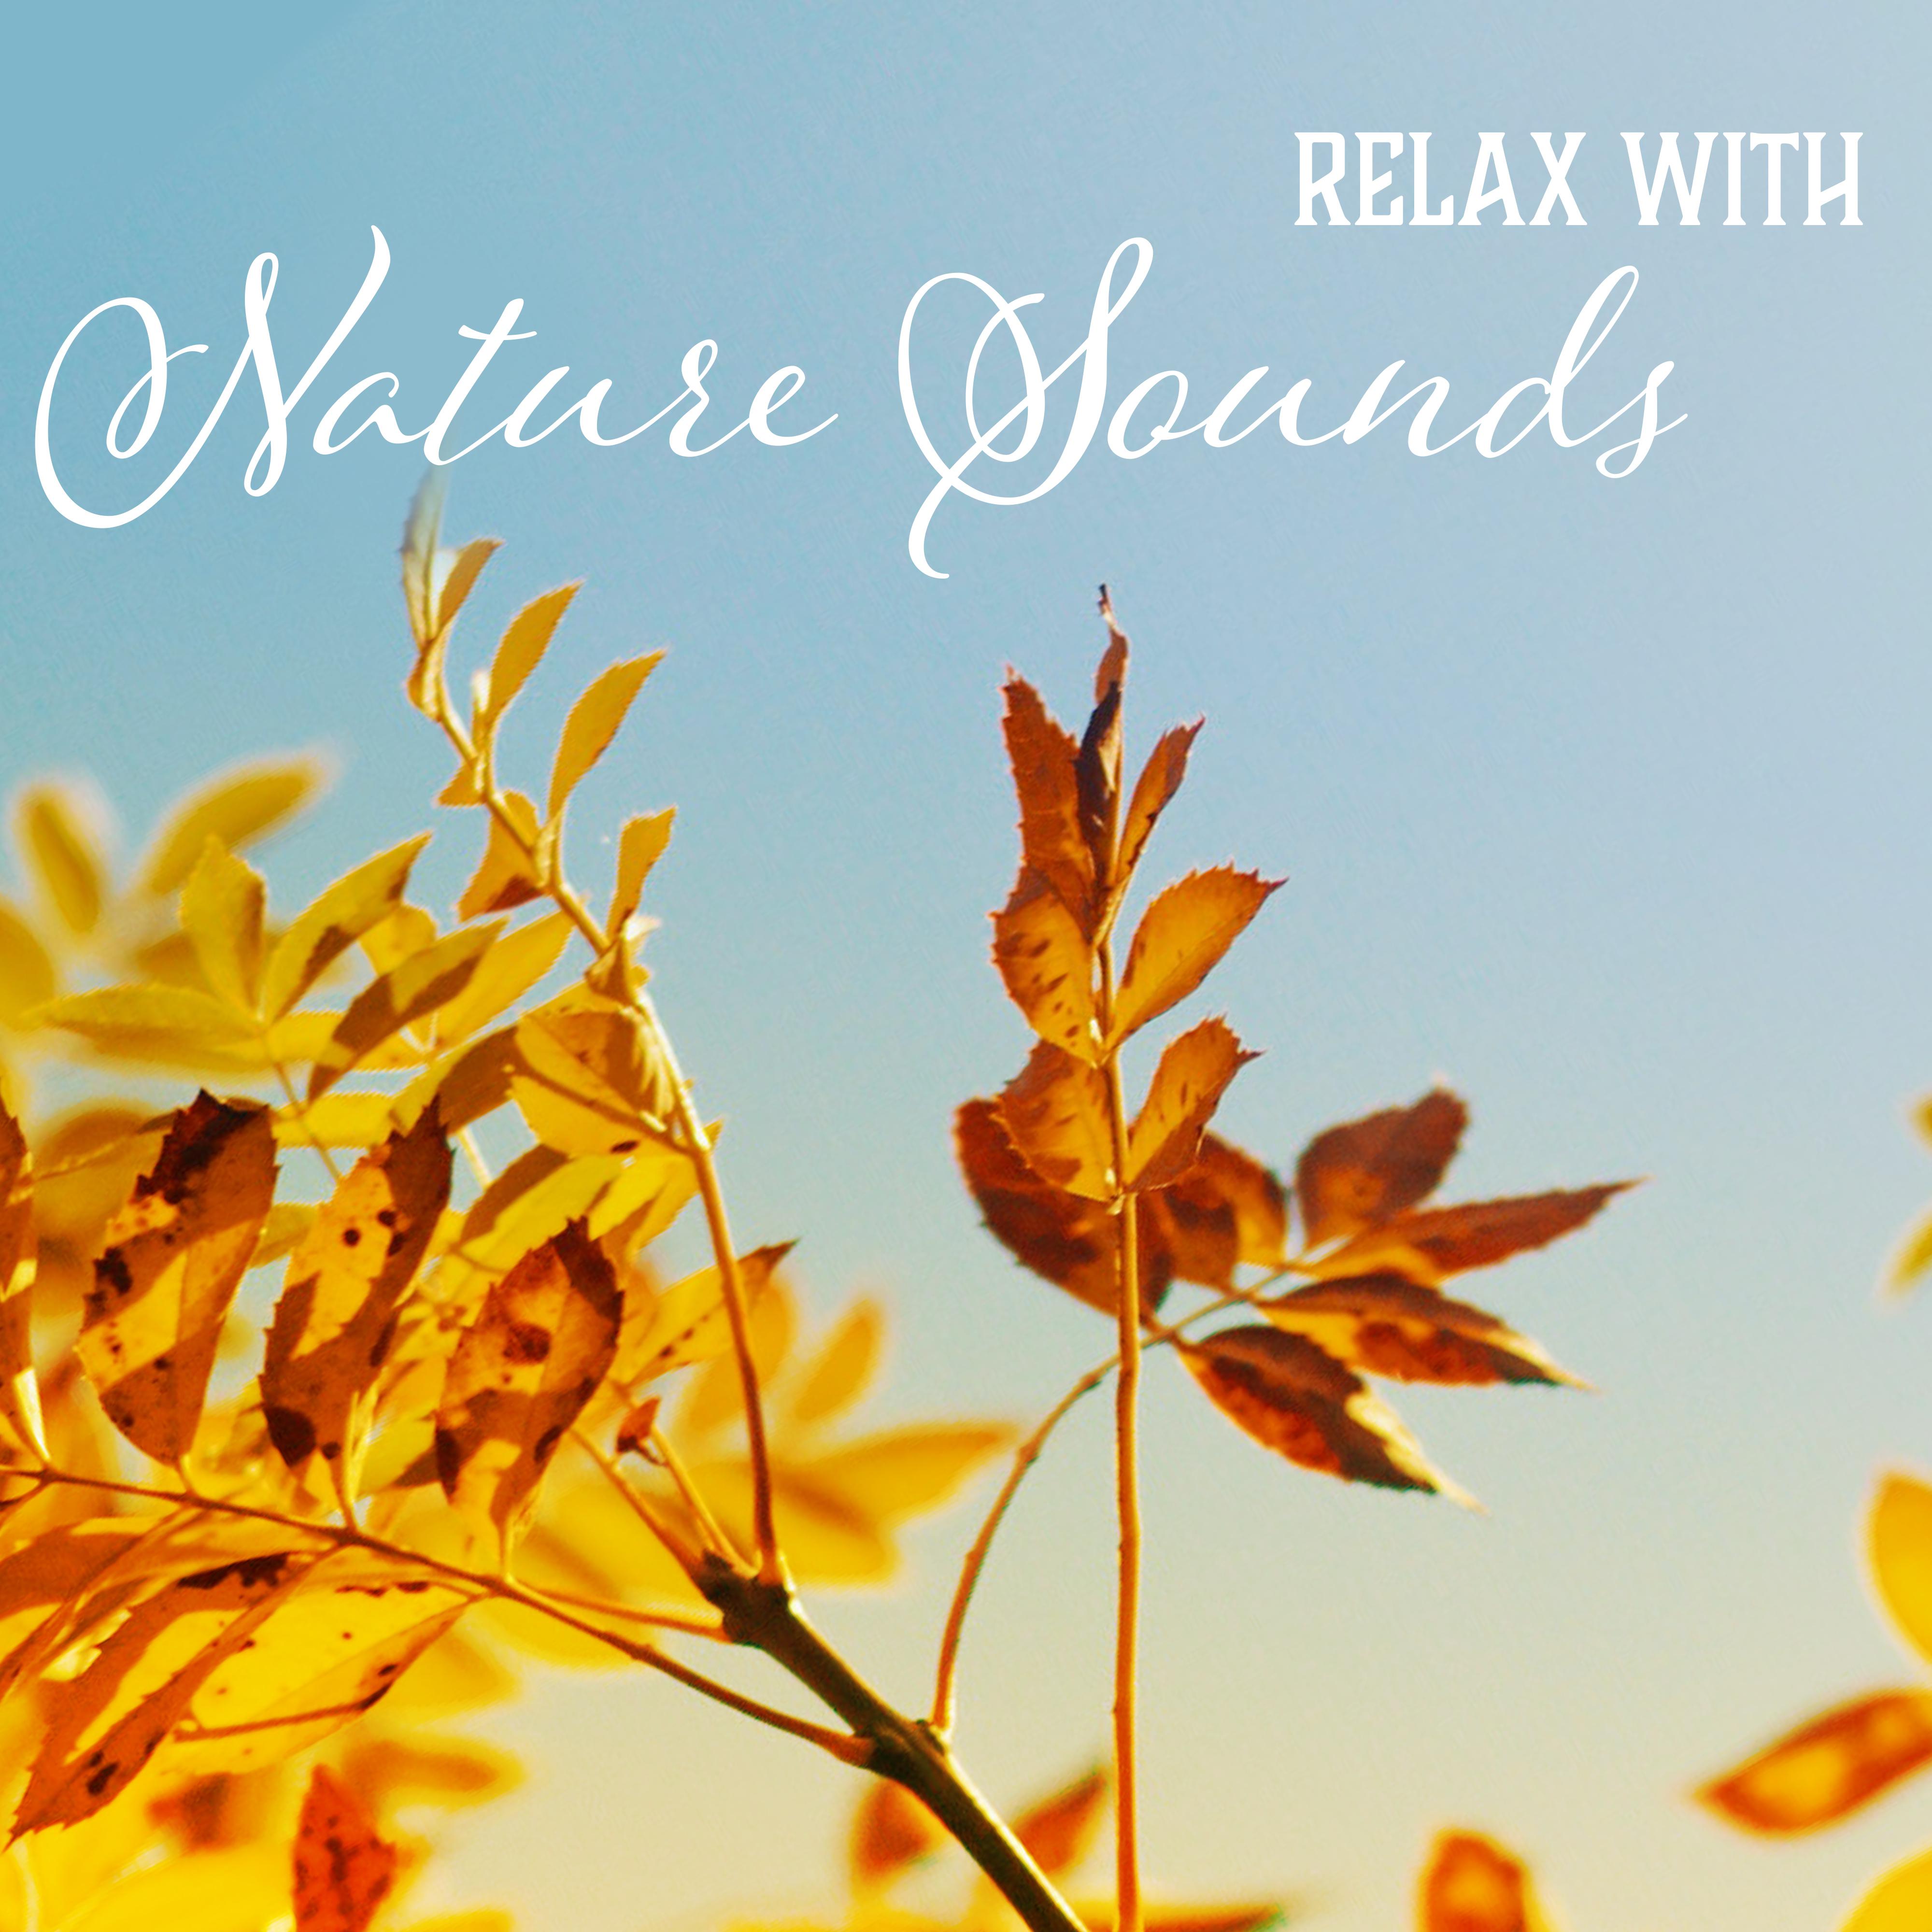 Relax with Nature Sounds – Stress Relieve, Time to Rest, Calming Nature Waves, Water Sounds